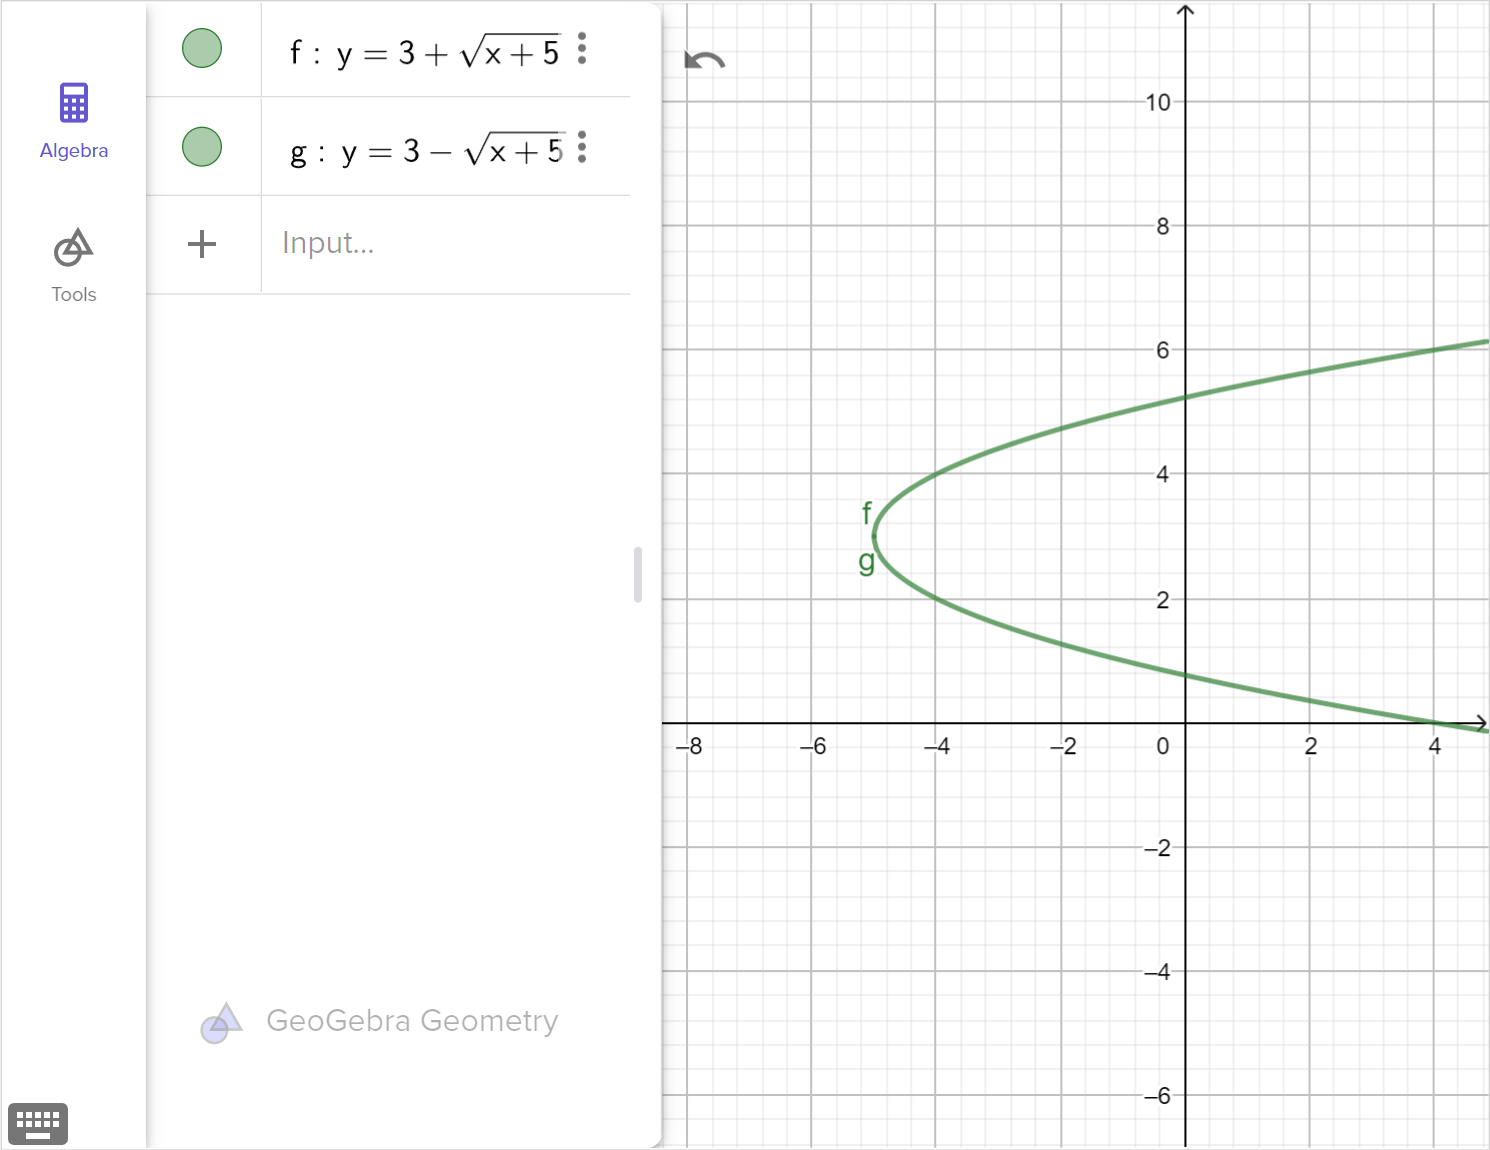 A screenshot of the GeoGebra geometry tool showing the graphs of y equals 3 plus square root of x plus 5 and y equals 3 minus square root of x plus 5. Speak to your teacher for more details.